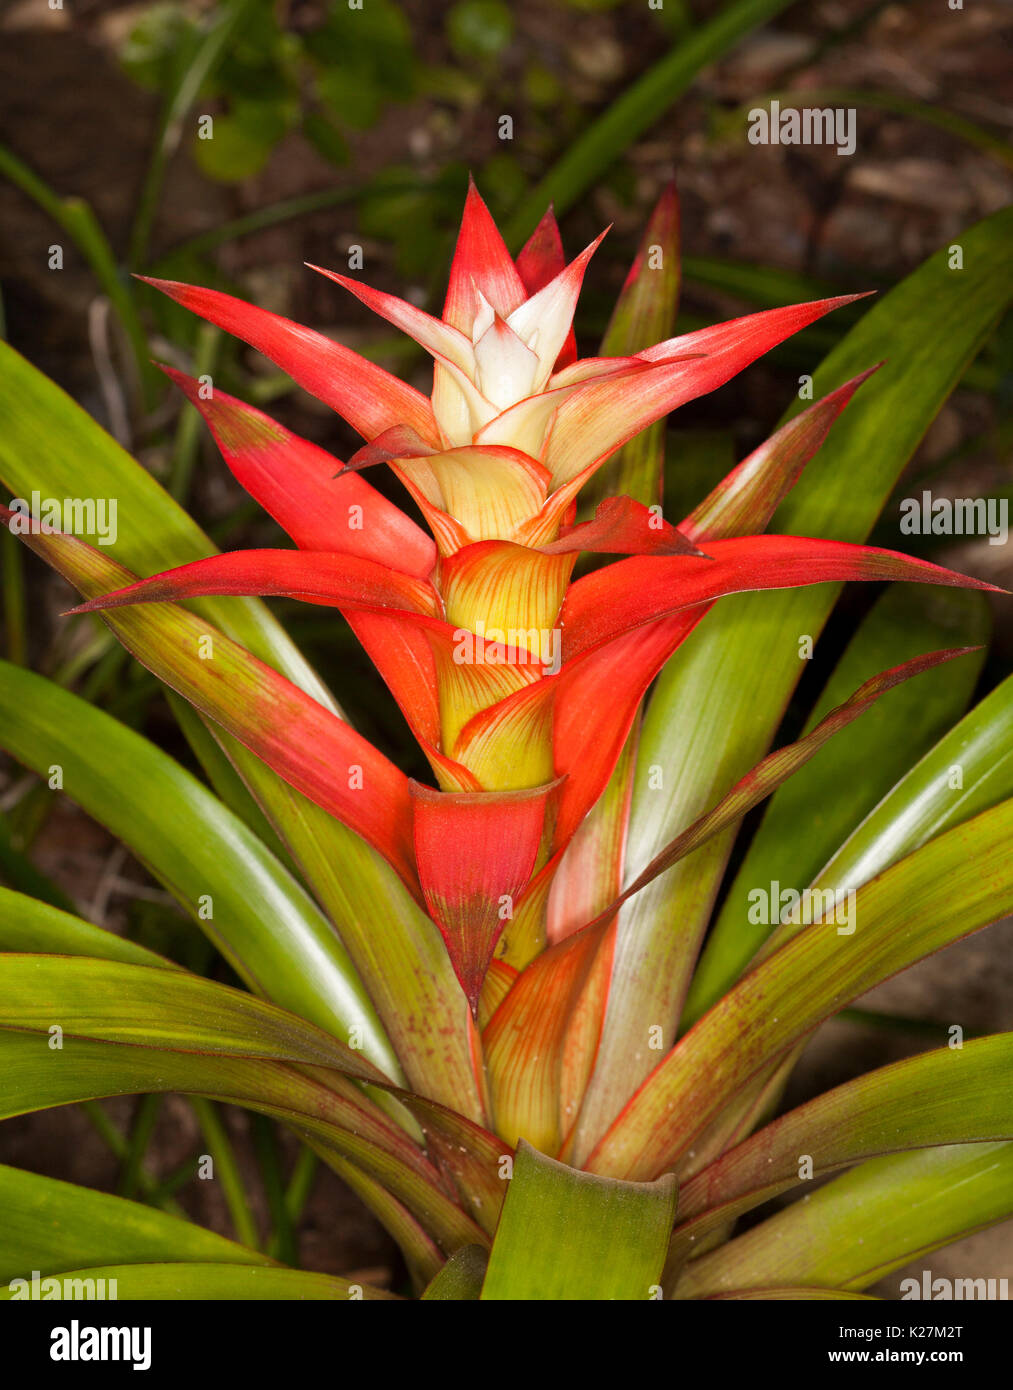 Vivid fire red bracts with white centre surrounded by green leaves of Guzmania species, a bromeliad Stock Photo